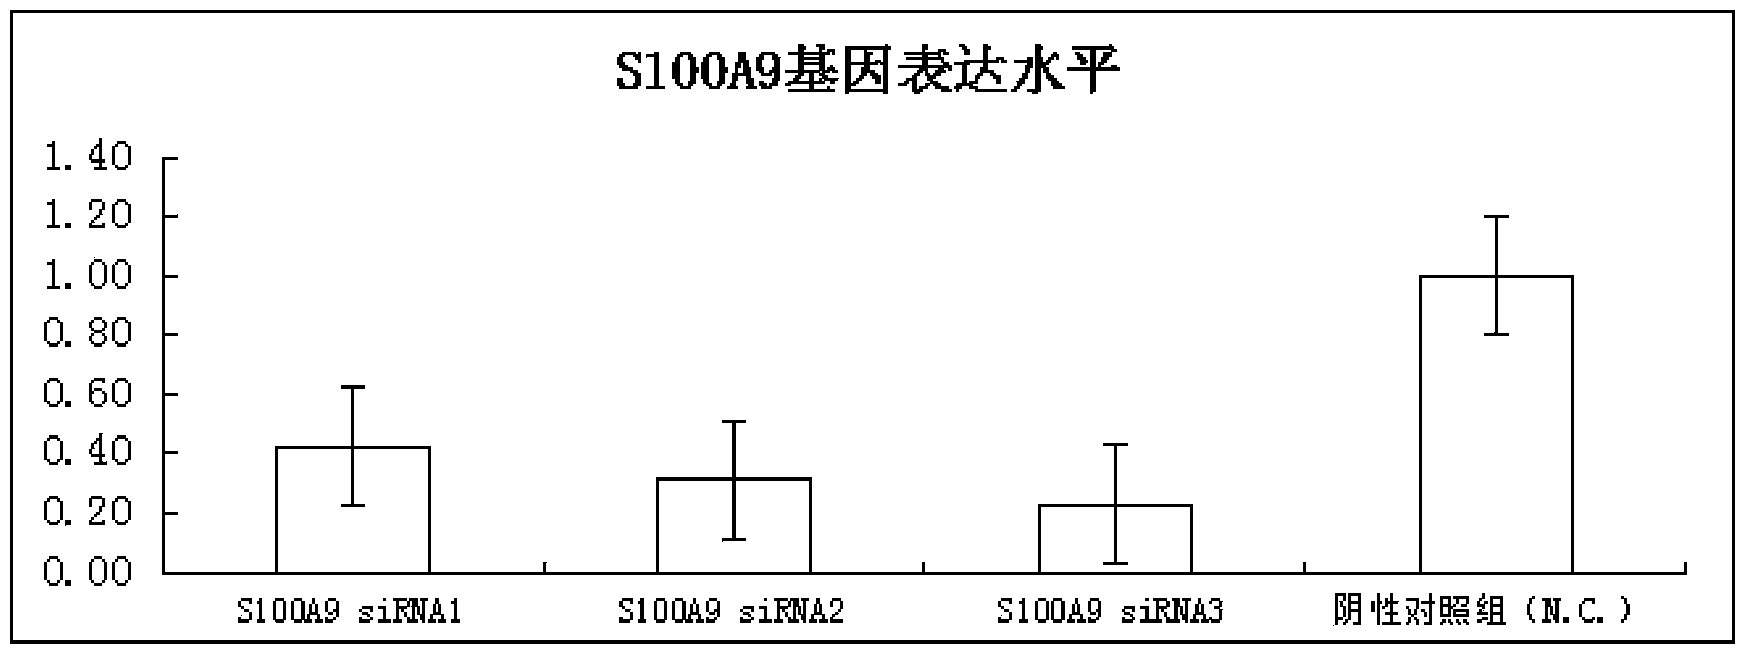 SiRNA inhibiting expression of gene S100A9 and application of siRNA